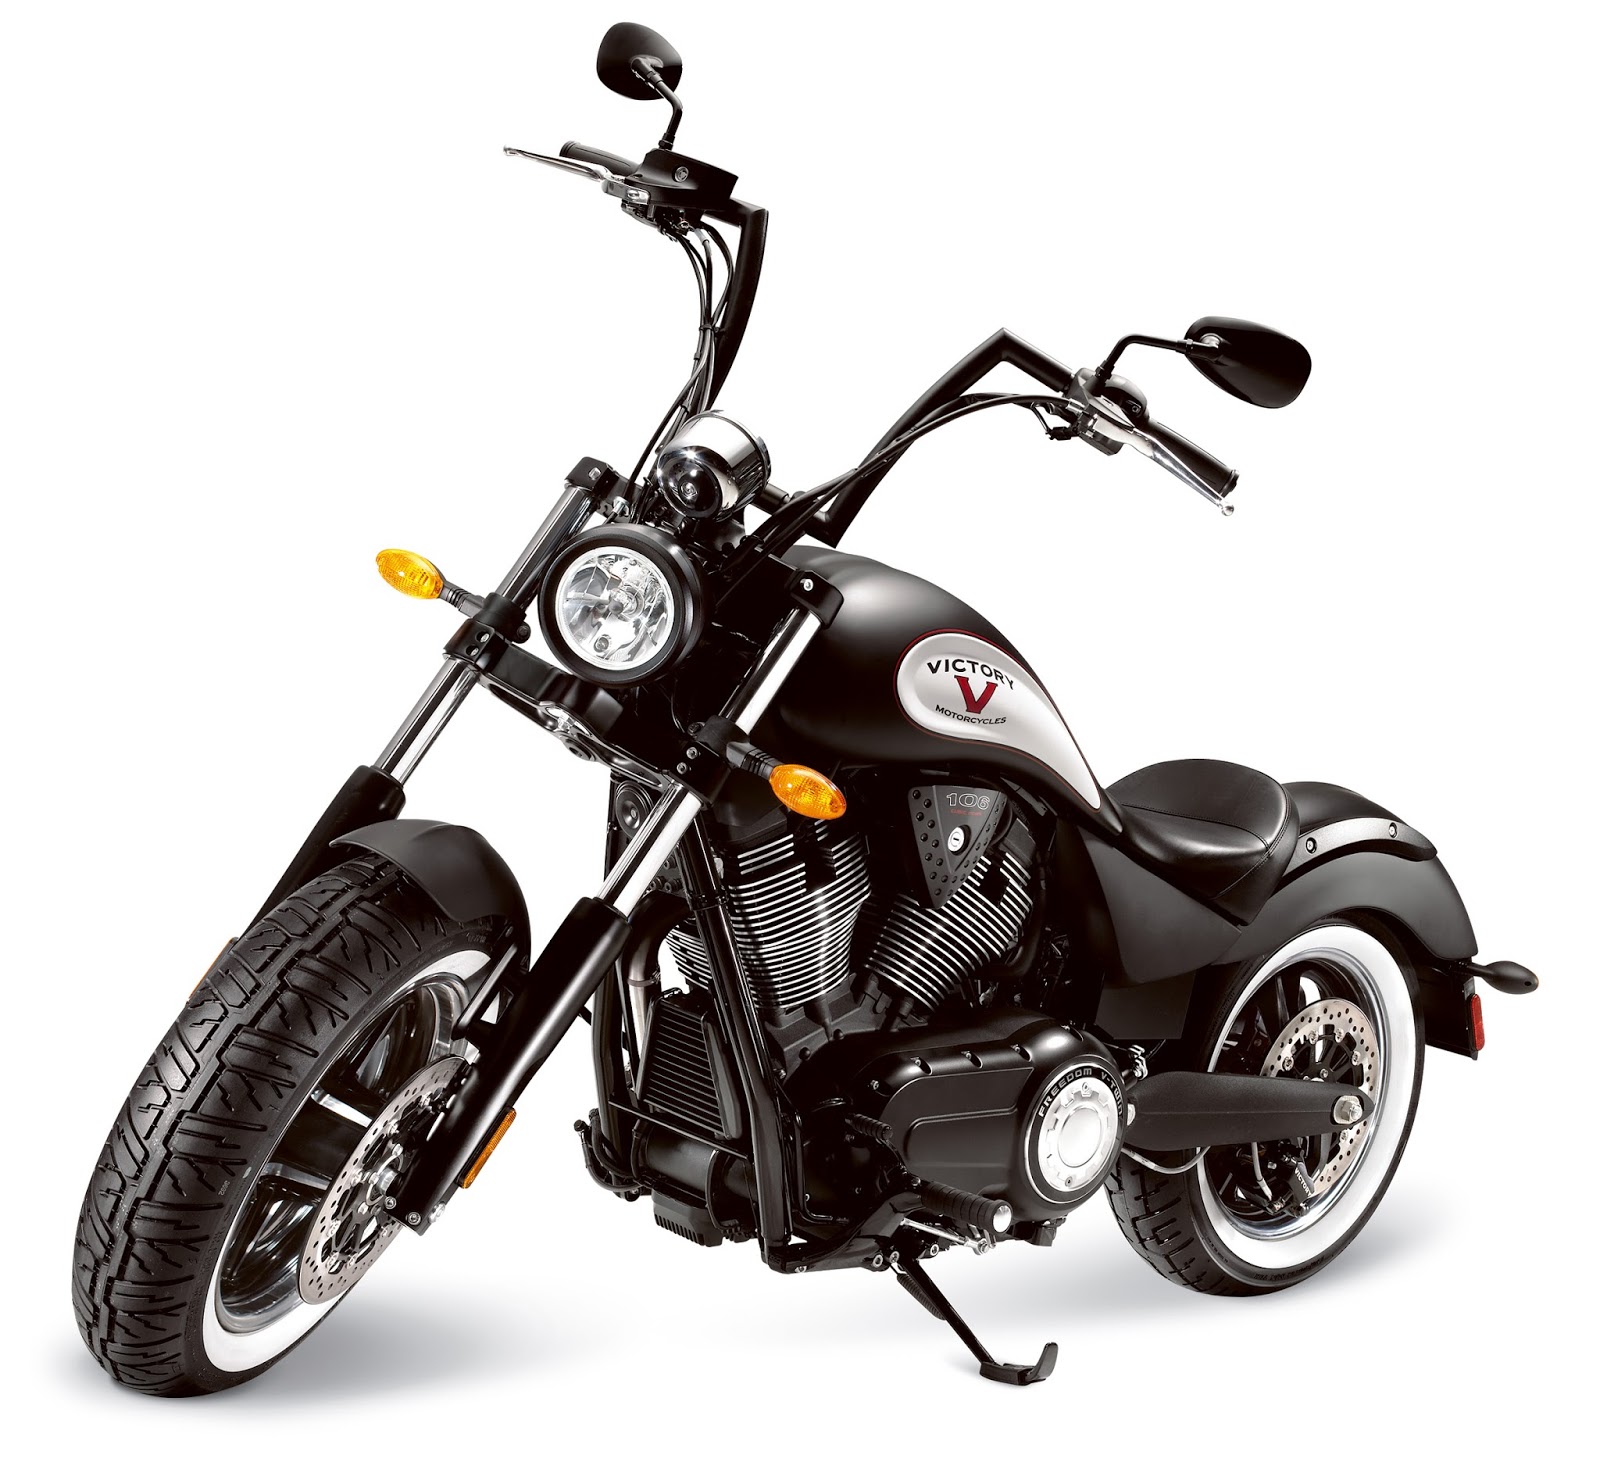 custom victory motorcycles Victory Motorcycles Announces Its 2014 Motorcycle Lineup Featuring Two 